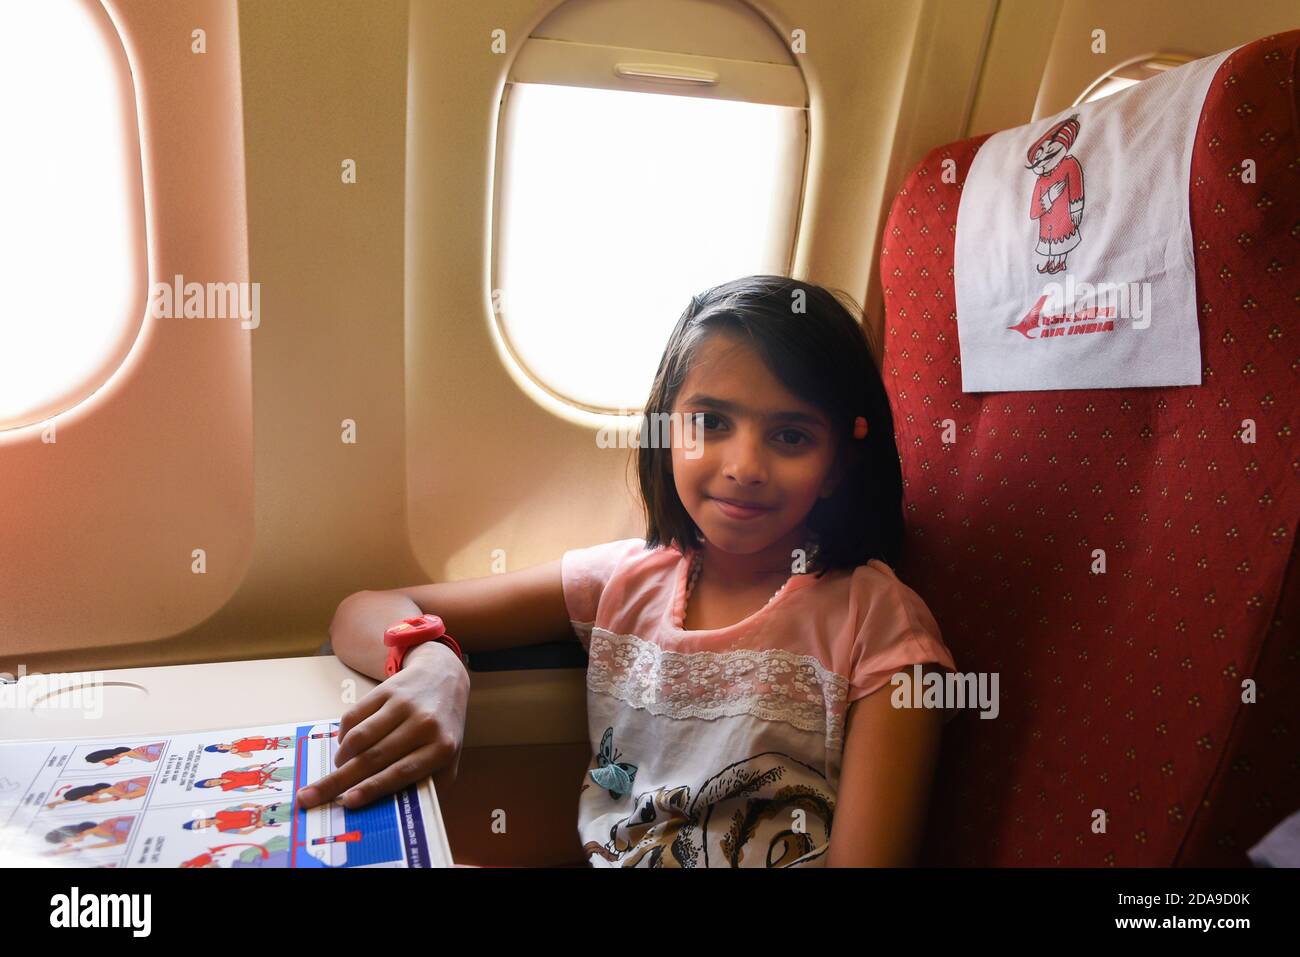 Indian airlines cabin of an Air India (AI) plane. Star Alliance Happy Indian girl traveling by an airplane. Child sitting by aircraft window India Stock Photo